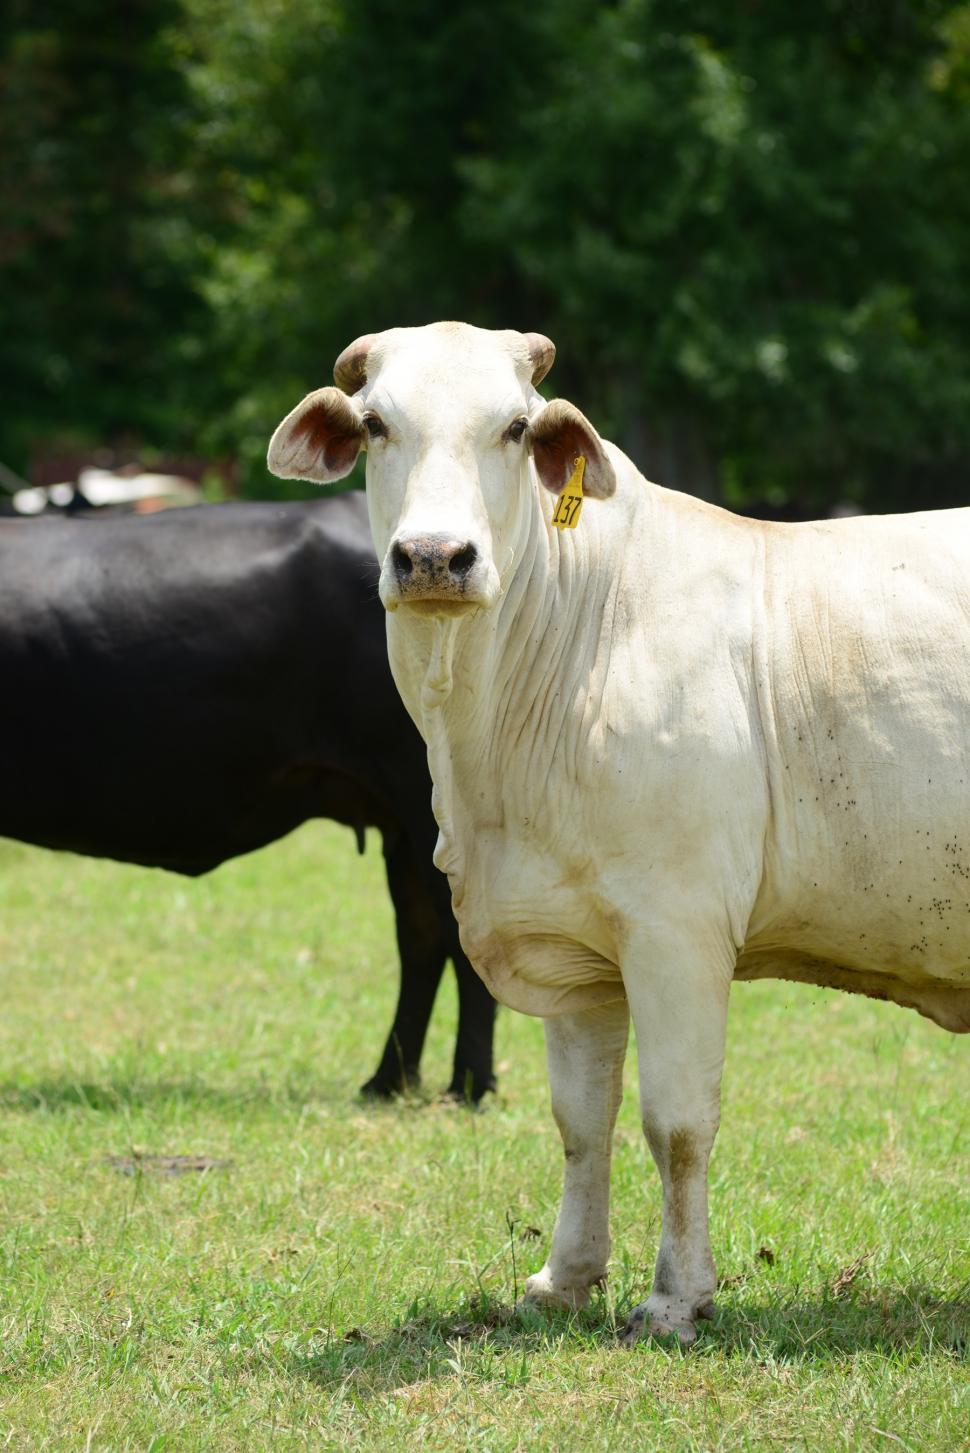 Free Image of White Cow Standing in Grass Field 